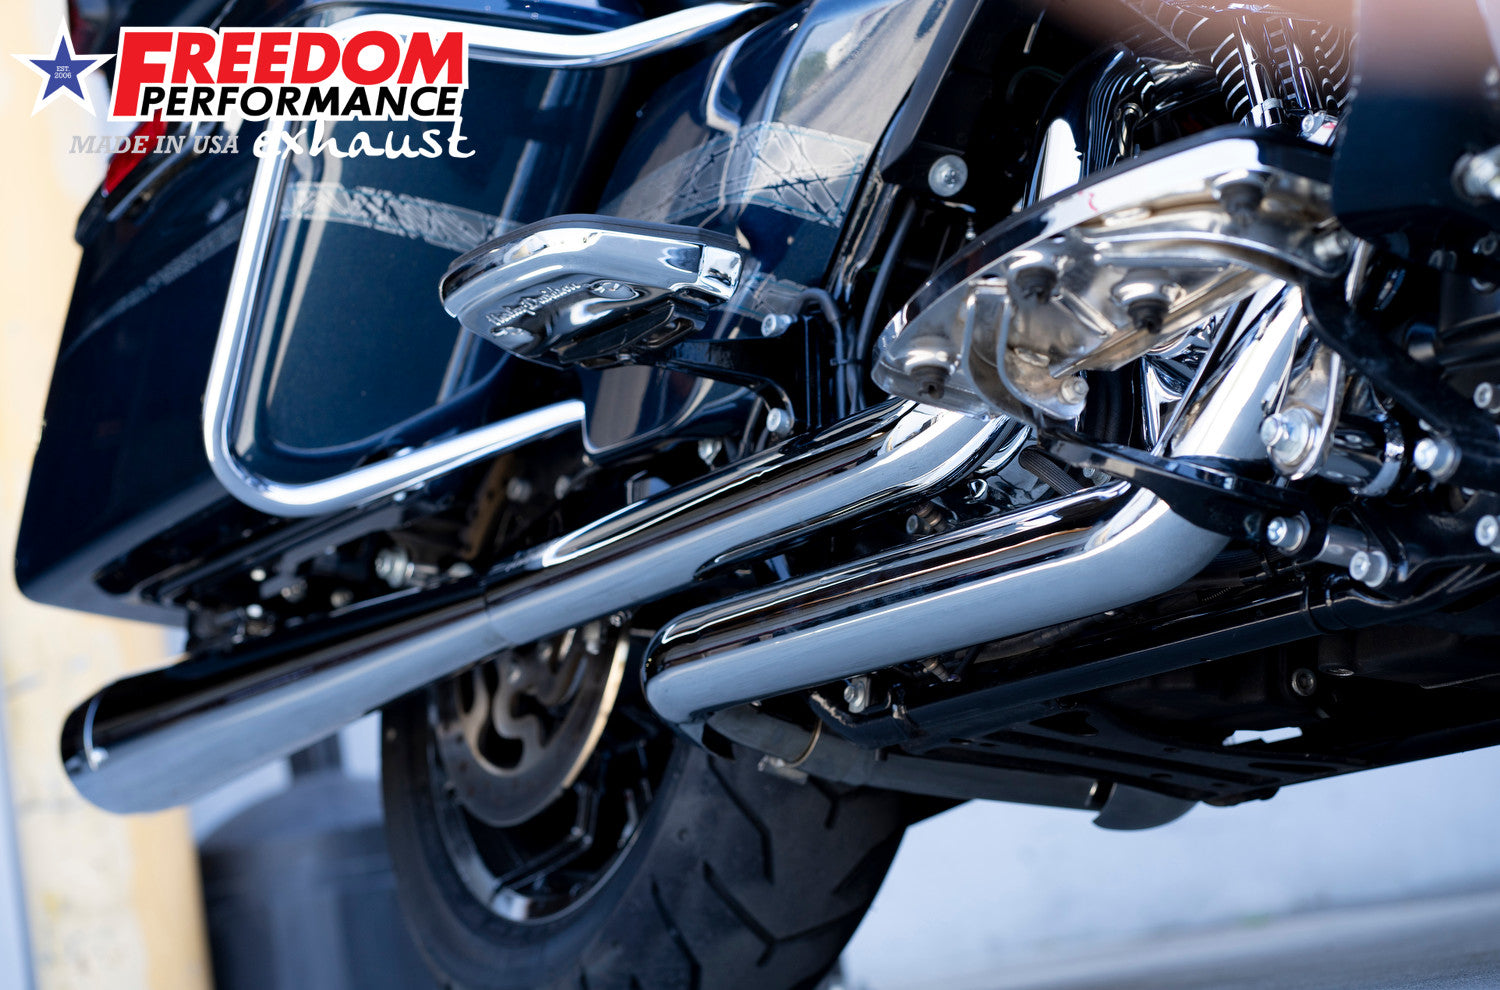 Tuck & Under Chrome True Dual Exhaust Headers - For 95-08 Harley Touring - Click Image to Close